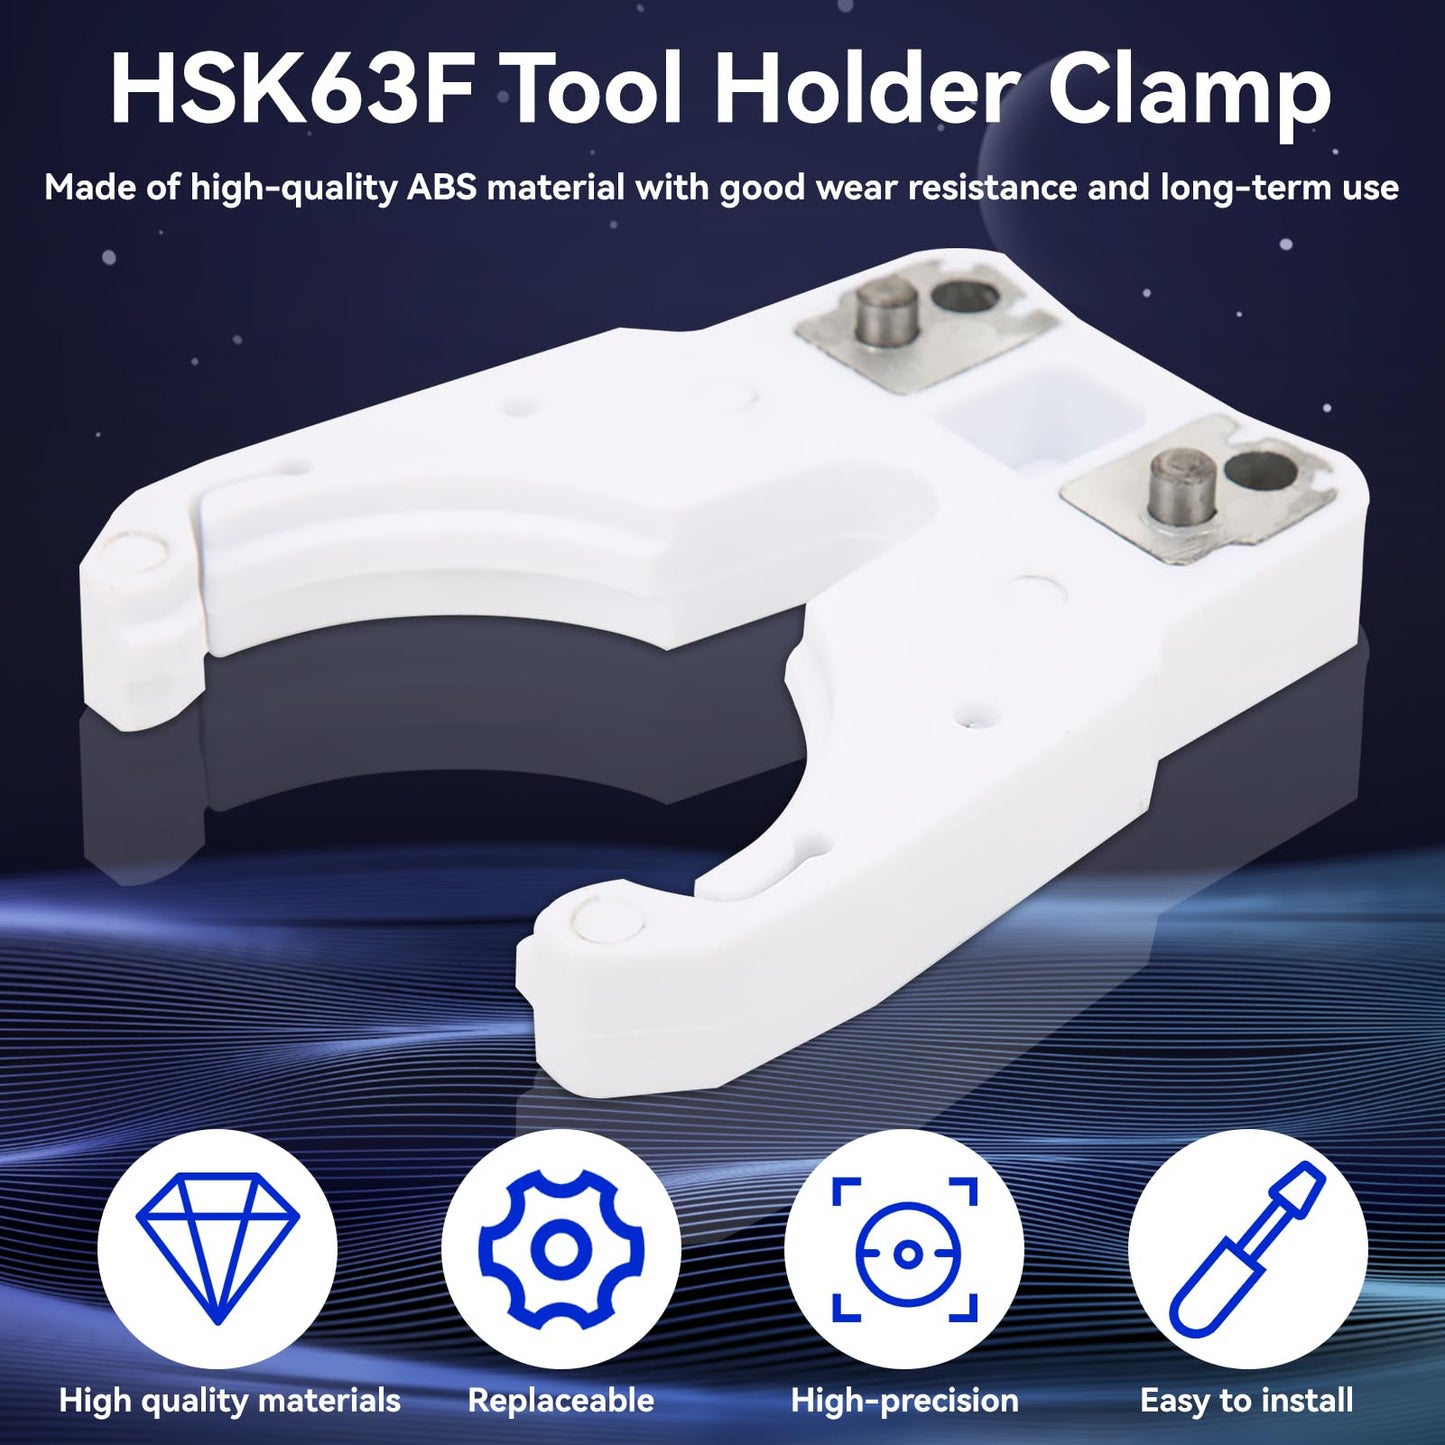 HSK63F Tool Holder Clamp, Cradle Fork Claw High Accuracy Automatic Tool Changer for Engraving Machine